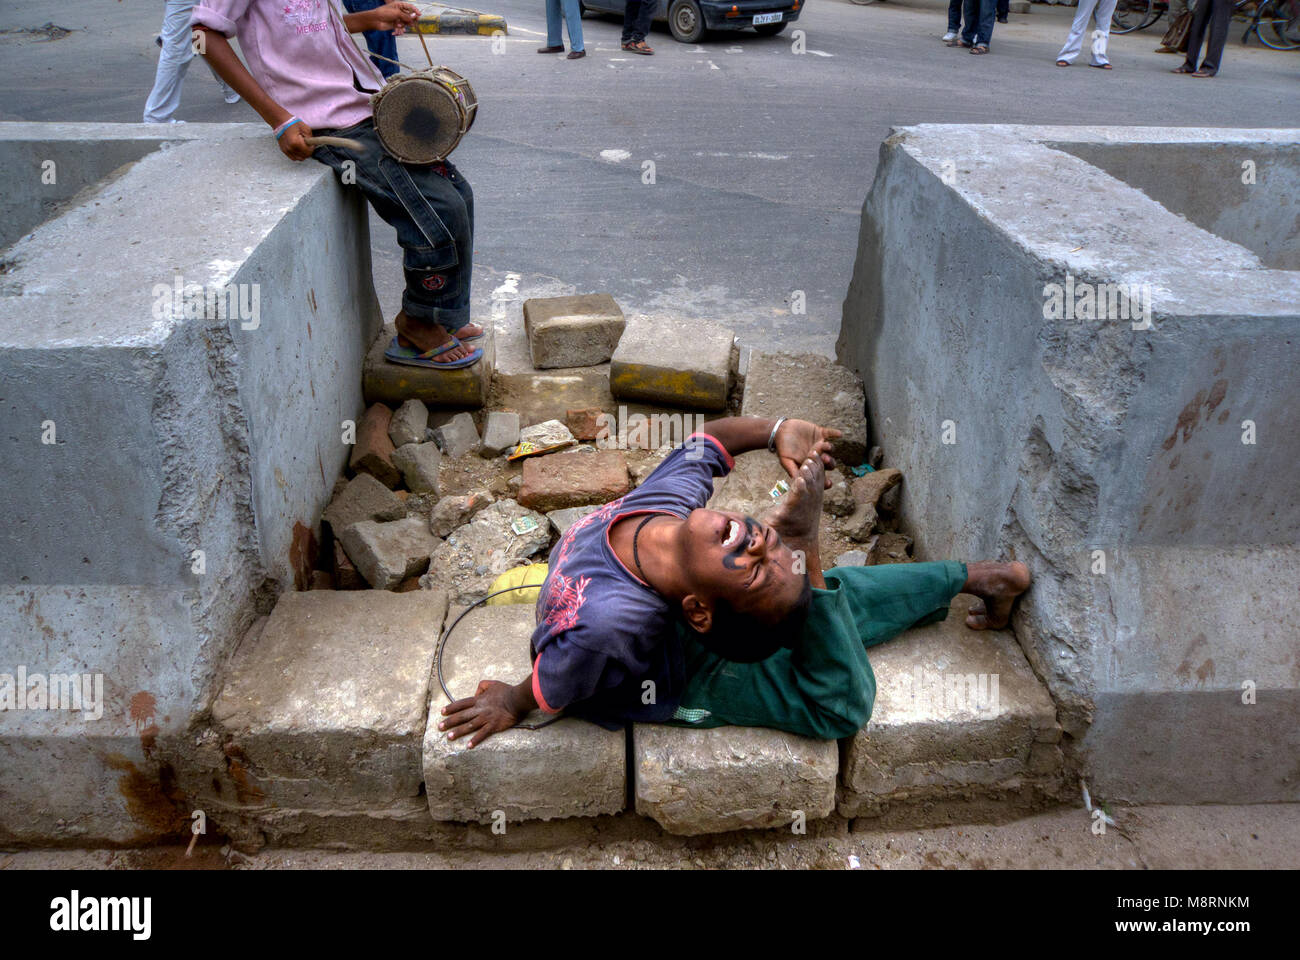 New Delhi, India: A child performs in an exercise of contortion on the road in New Delhi Stock Photo